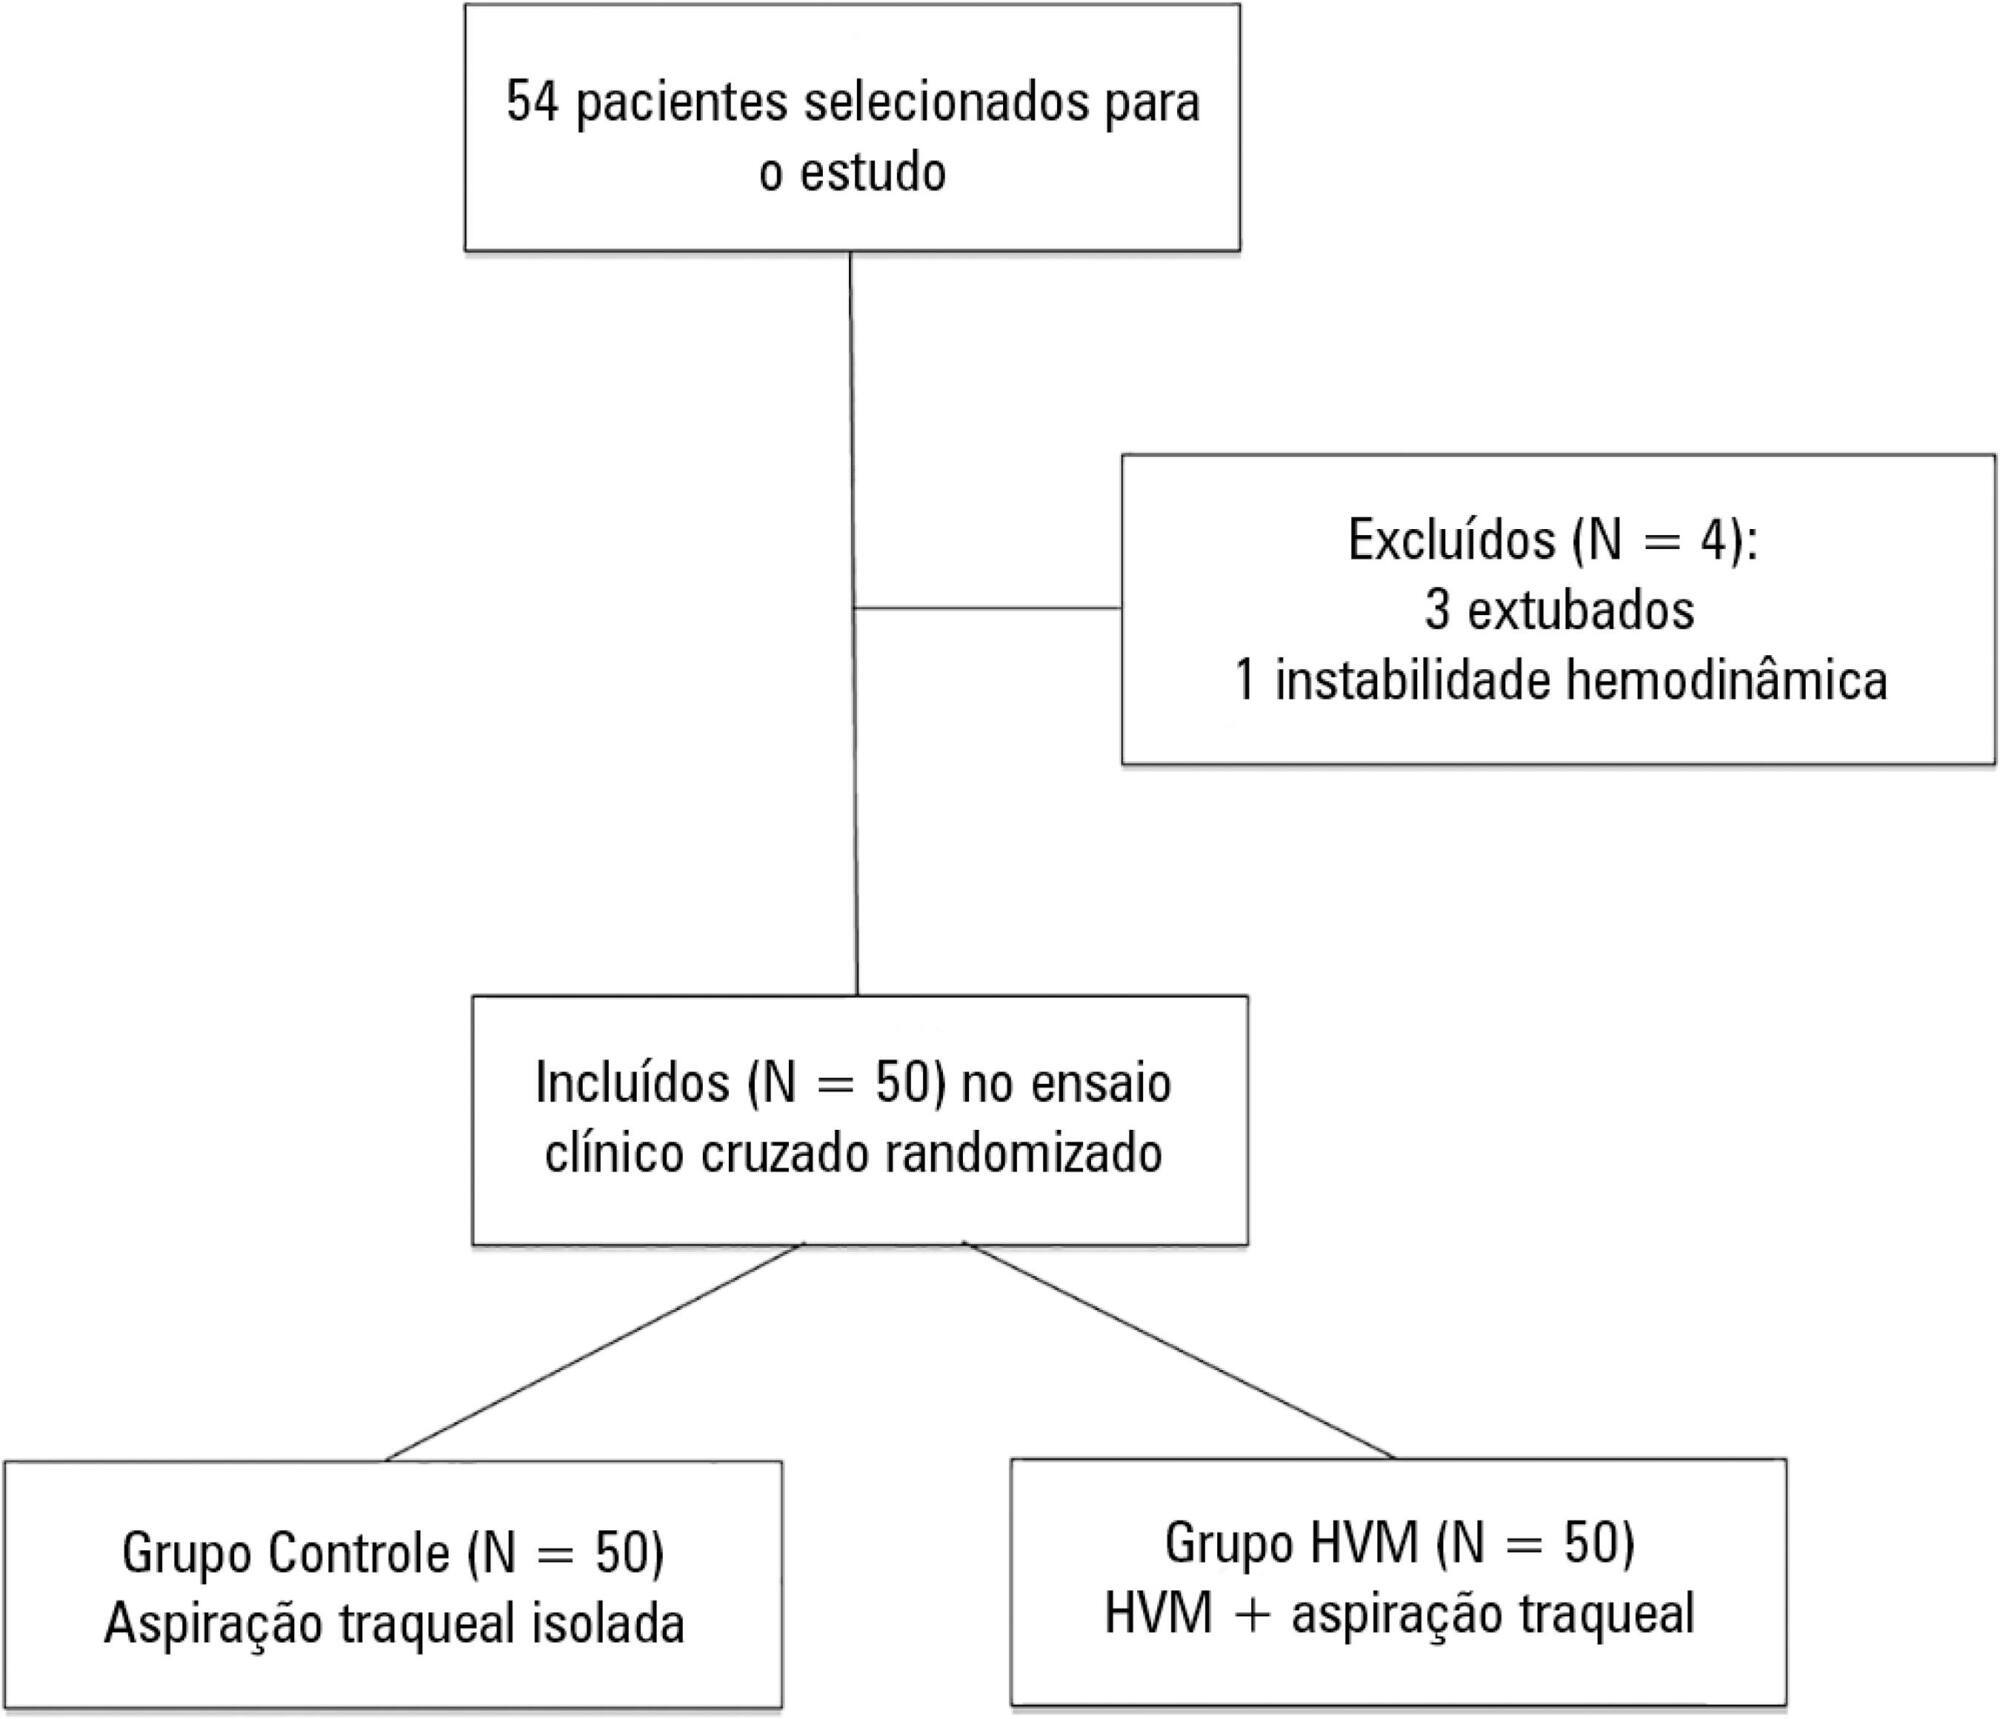 Lung hyperinflation by mechanical ventilation versus isolated tracheal aspiration in the bronchial hygiene of patients undergoing mechanical ventilation